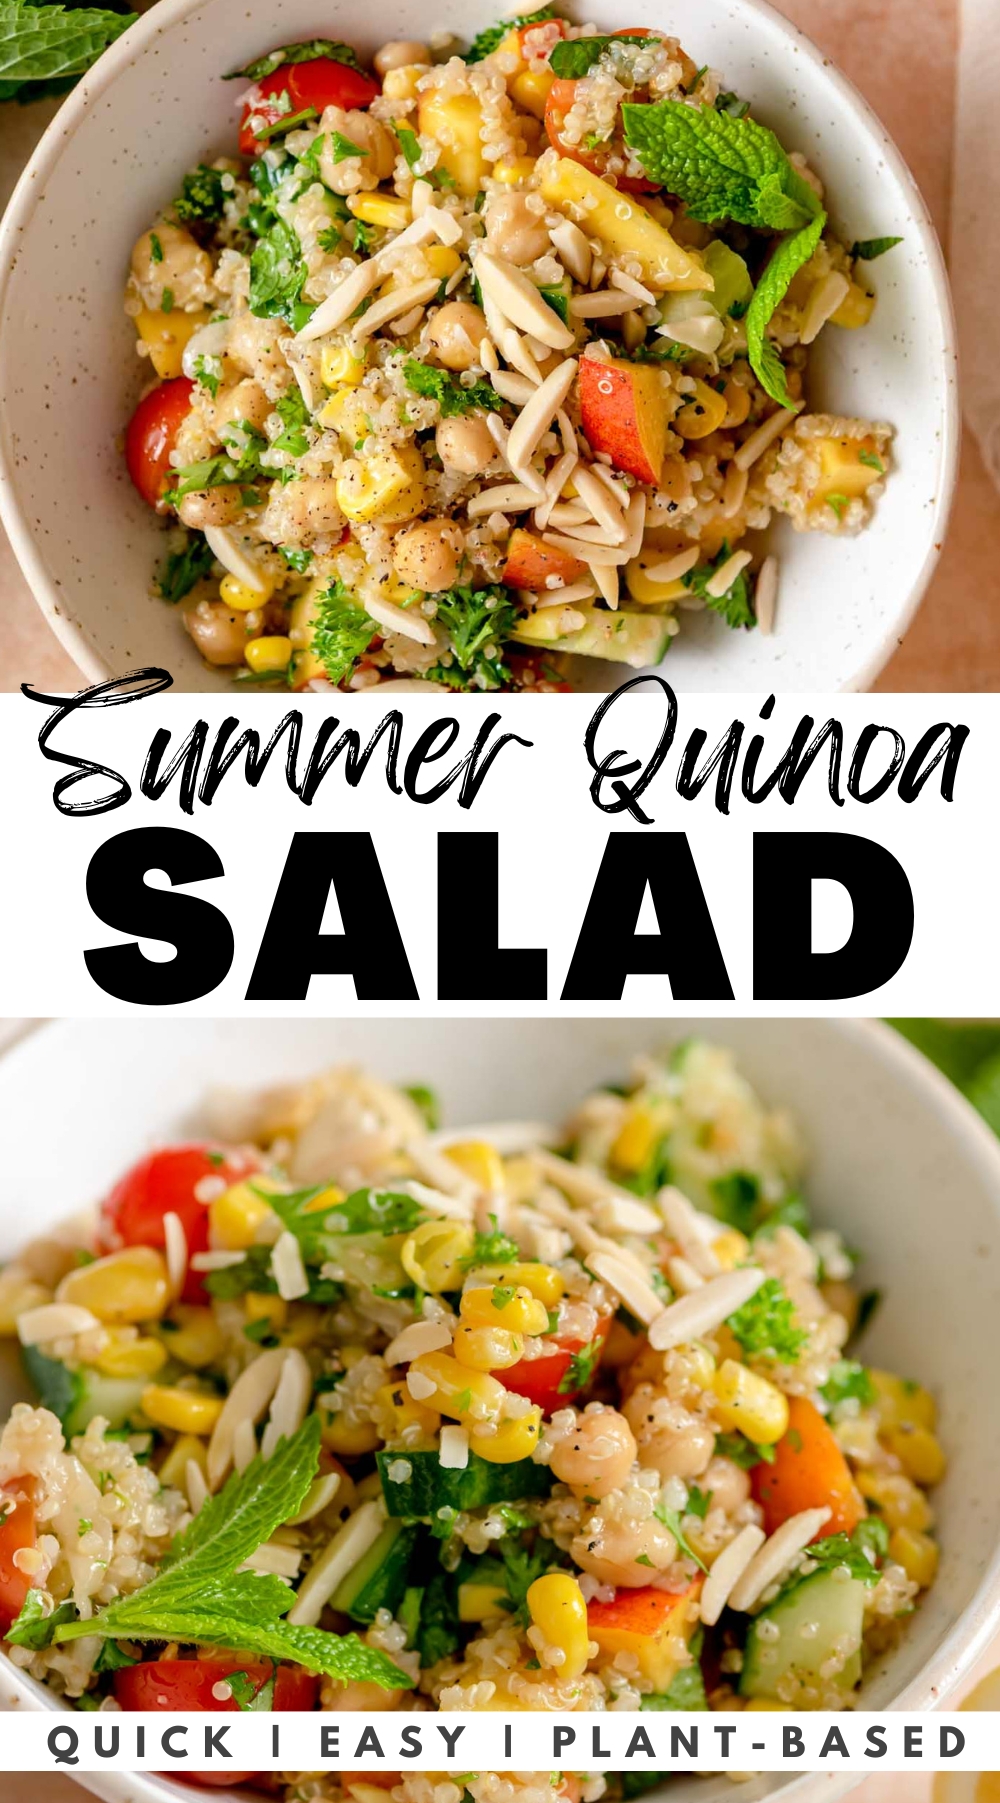 Pinterest graphic for vegan summer quinoa salad with images of the potato and a stylized text title graphic.